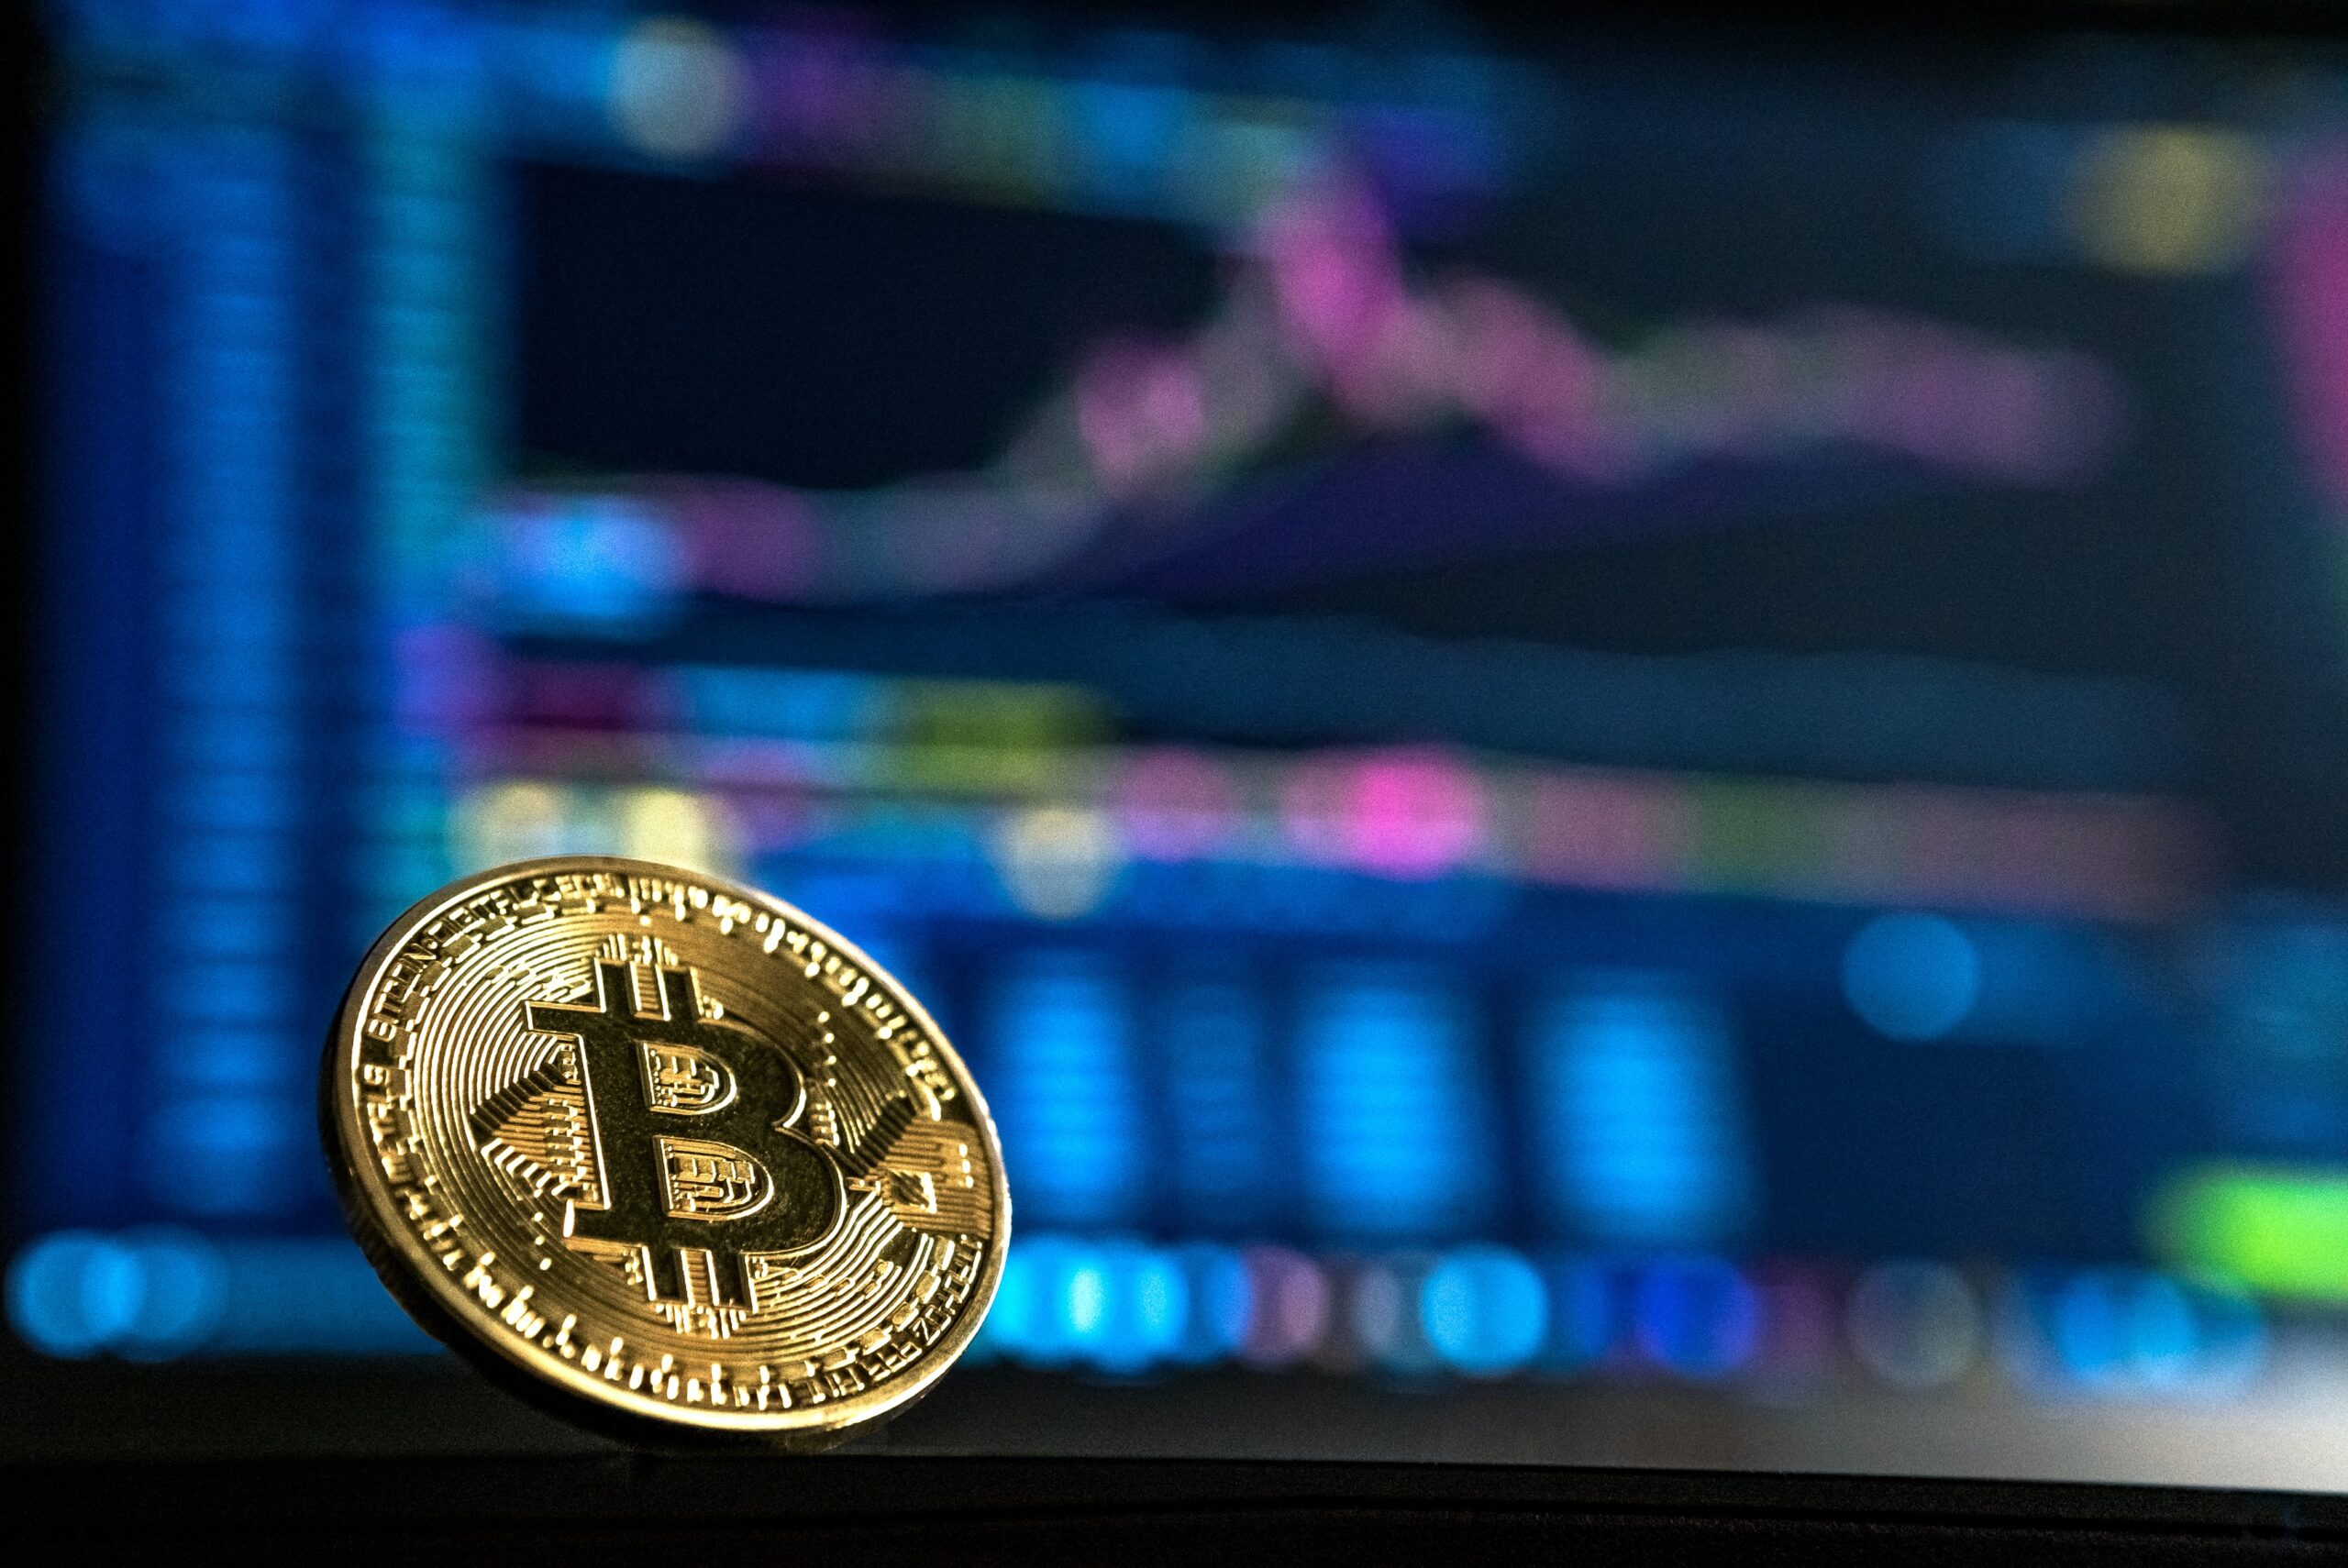 Toncoin vs. Bitcoin: Which One Is a Better Investment?